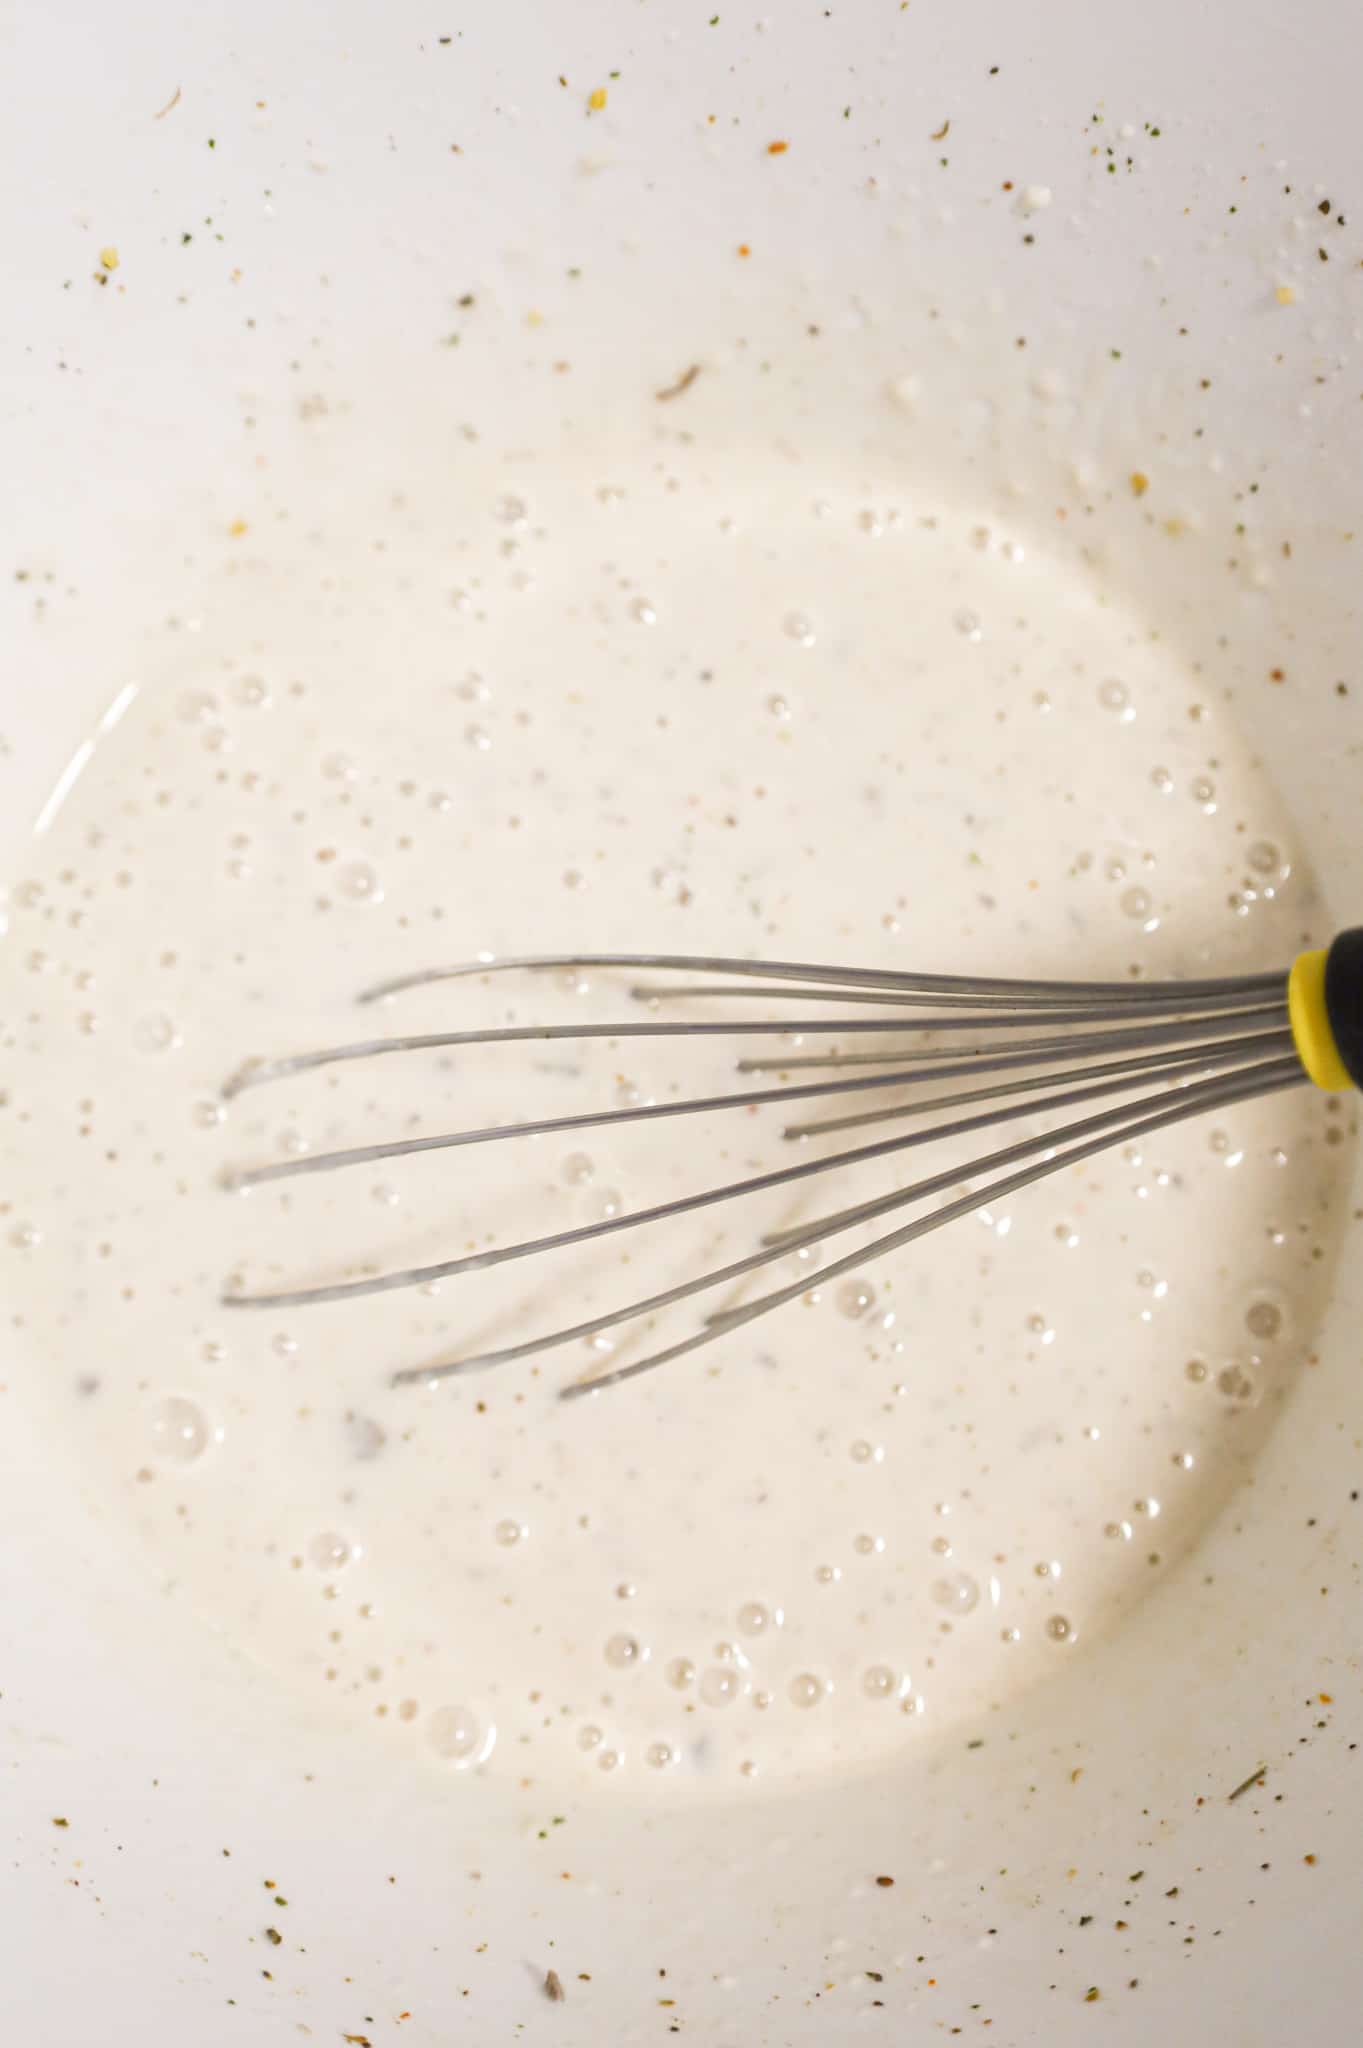 cream of mushroom soup mixture being whisked in a mixing bowl